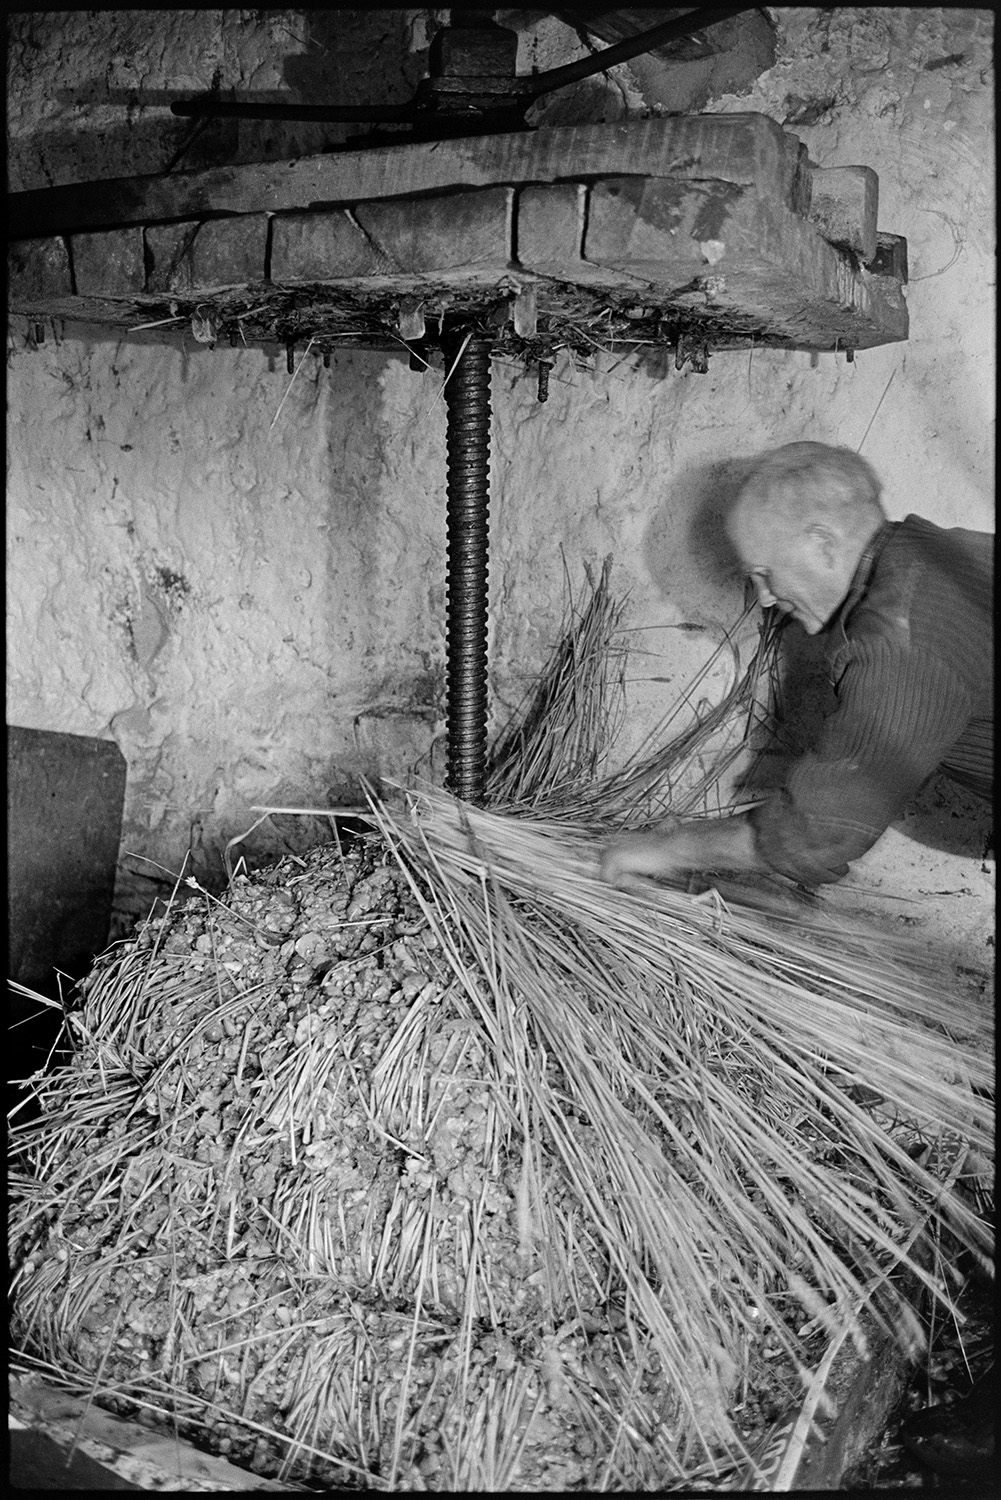 Cider making, apple crusher and cider press. 
[Bill Hammond making the cheese, layers of apple pulp and straw, on a cider press in a barn at Rashleigh Mill, Chulmleigh.]